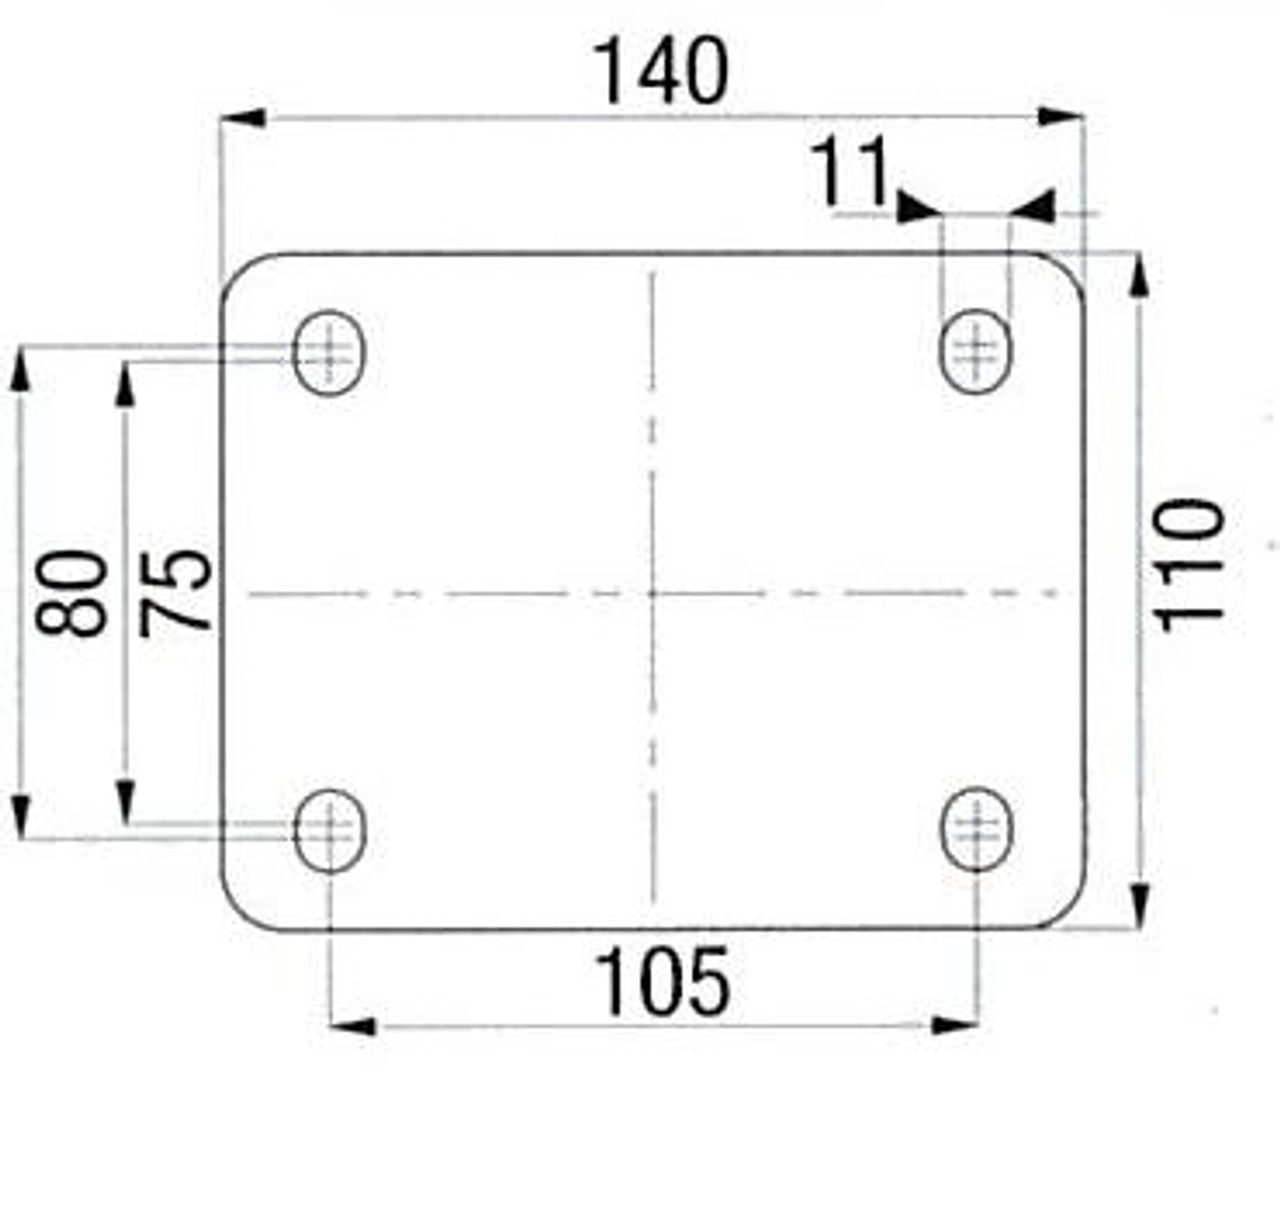 110 x 140 top plate dimensions